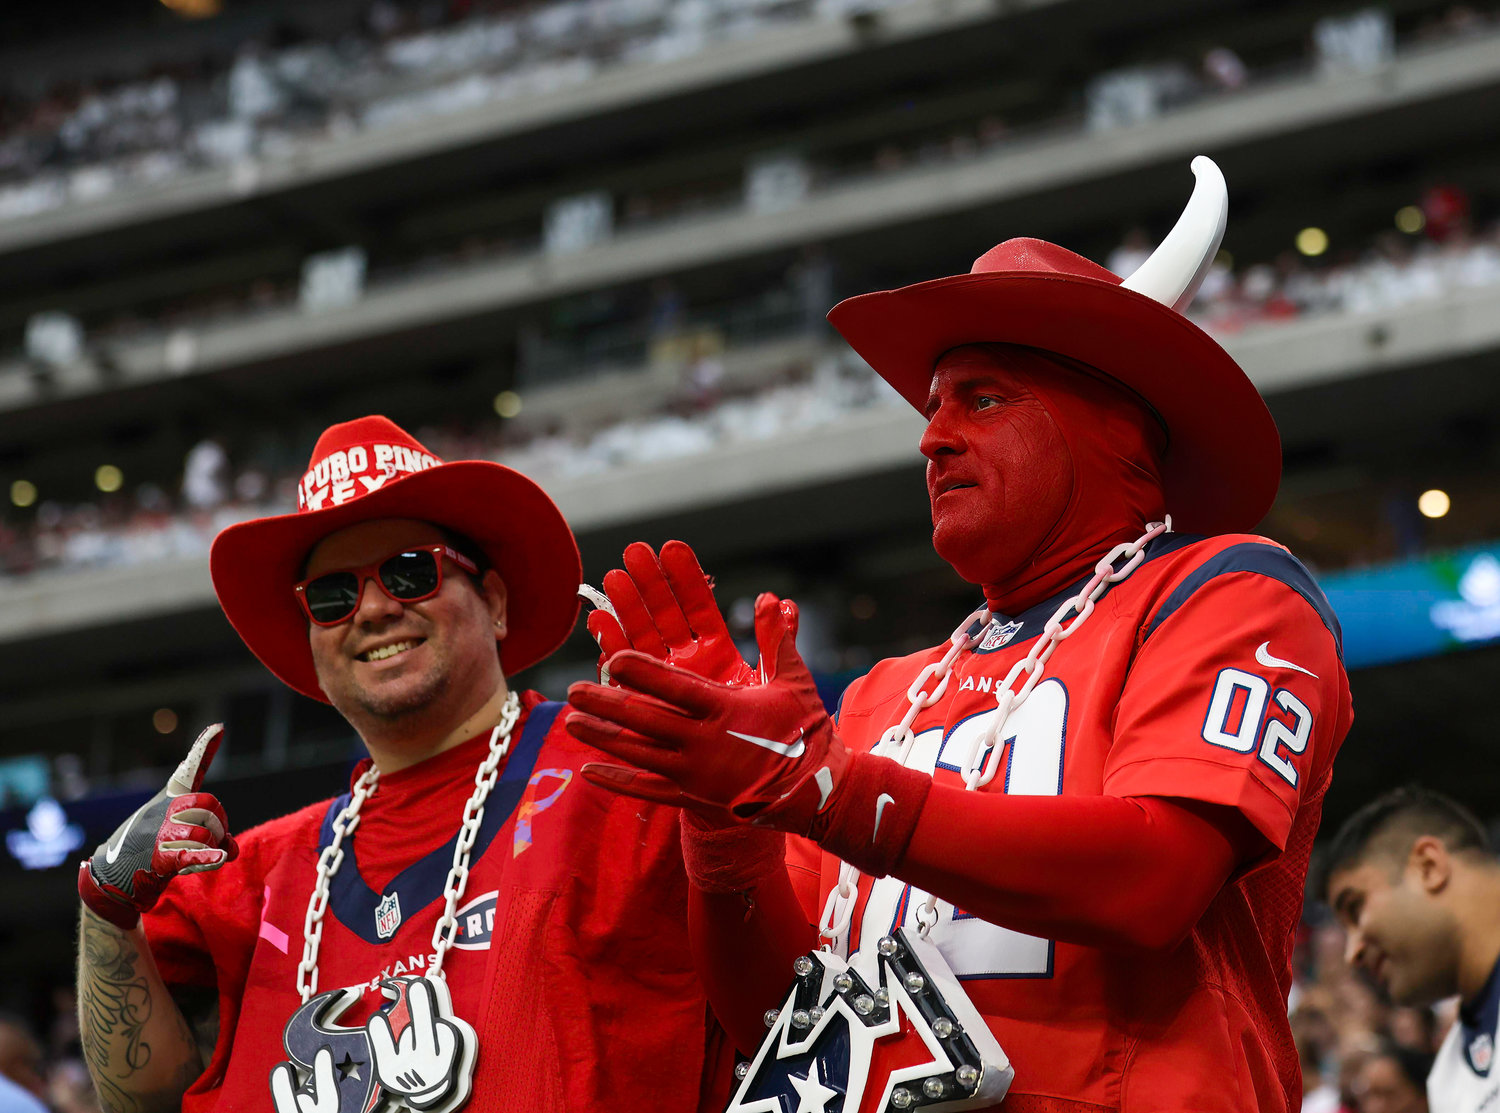 Houston Texans fans cheer during an NFL game between the Texans and the Colts on September 11, 2022 in Houston. The game ended in a 20-20 tie after a scoreless overtime period.